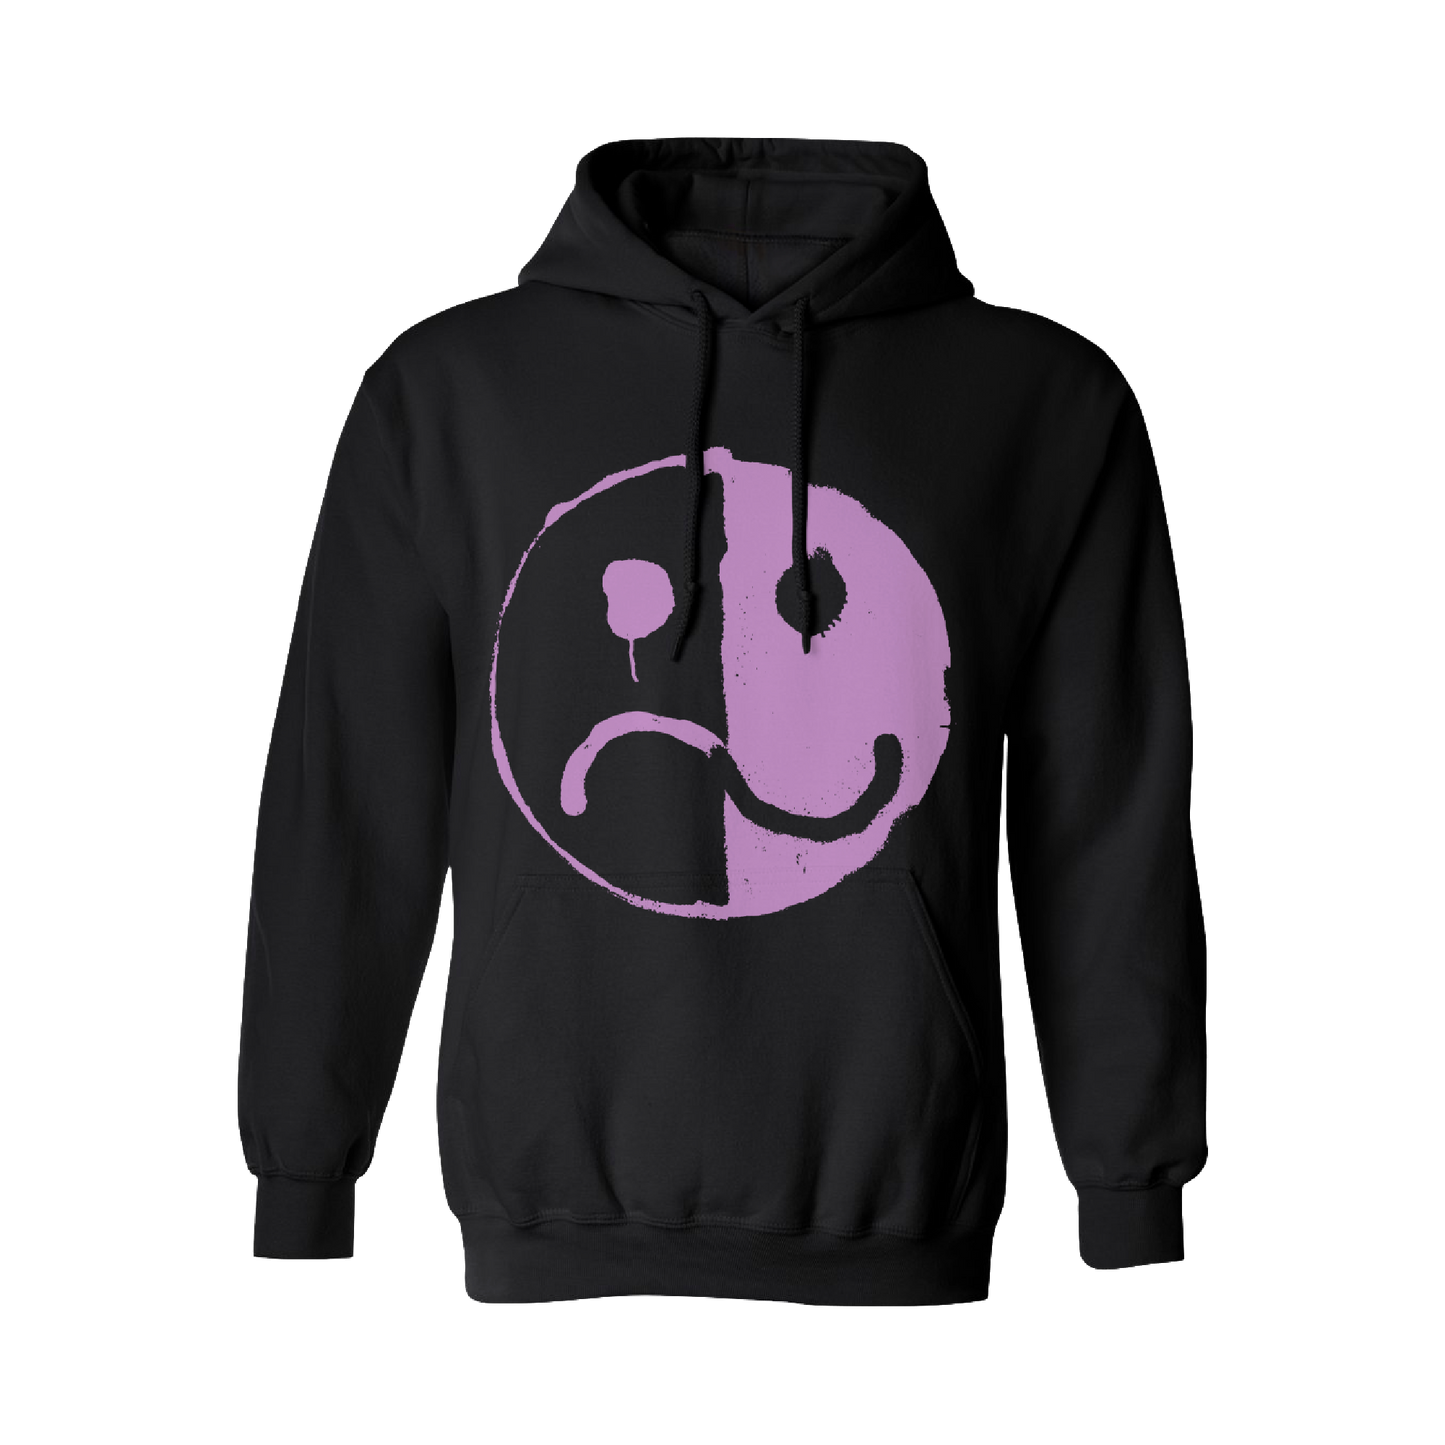 BLACK SMILE/FROWN PULLOVER HOODIE – Fall Out Boy UK